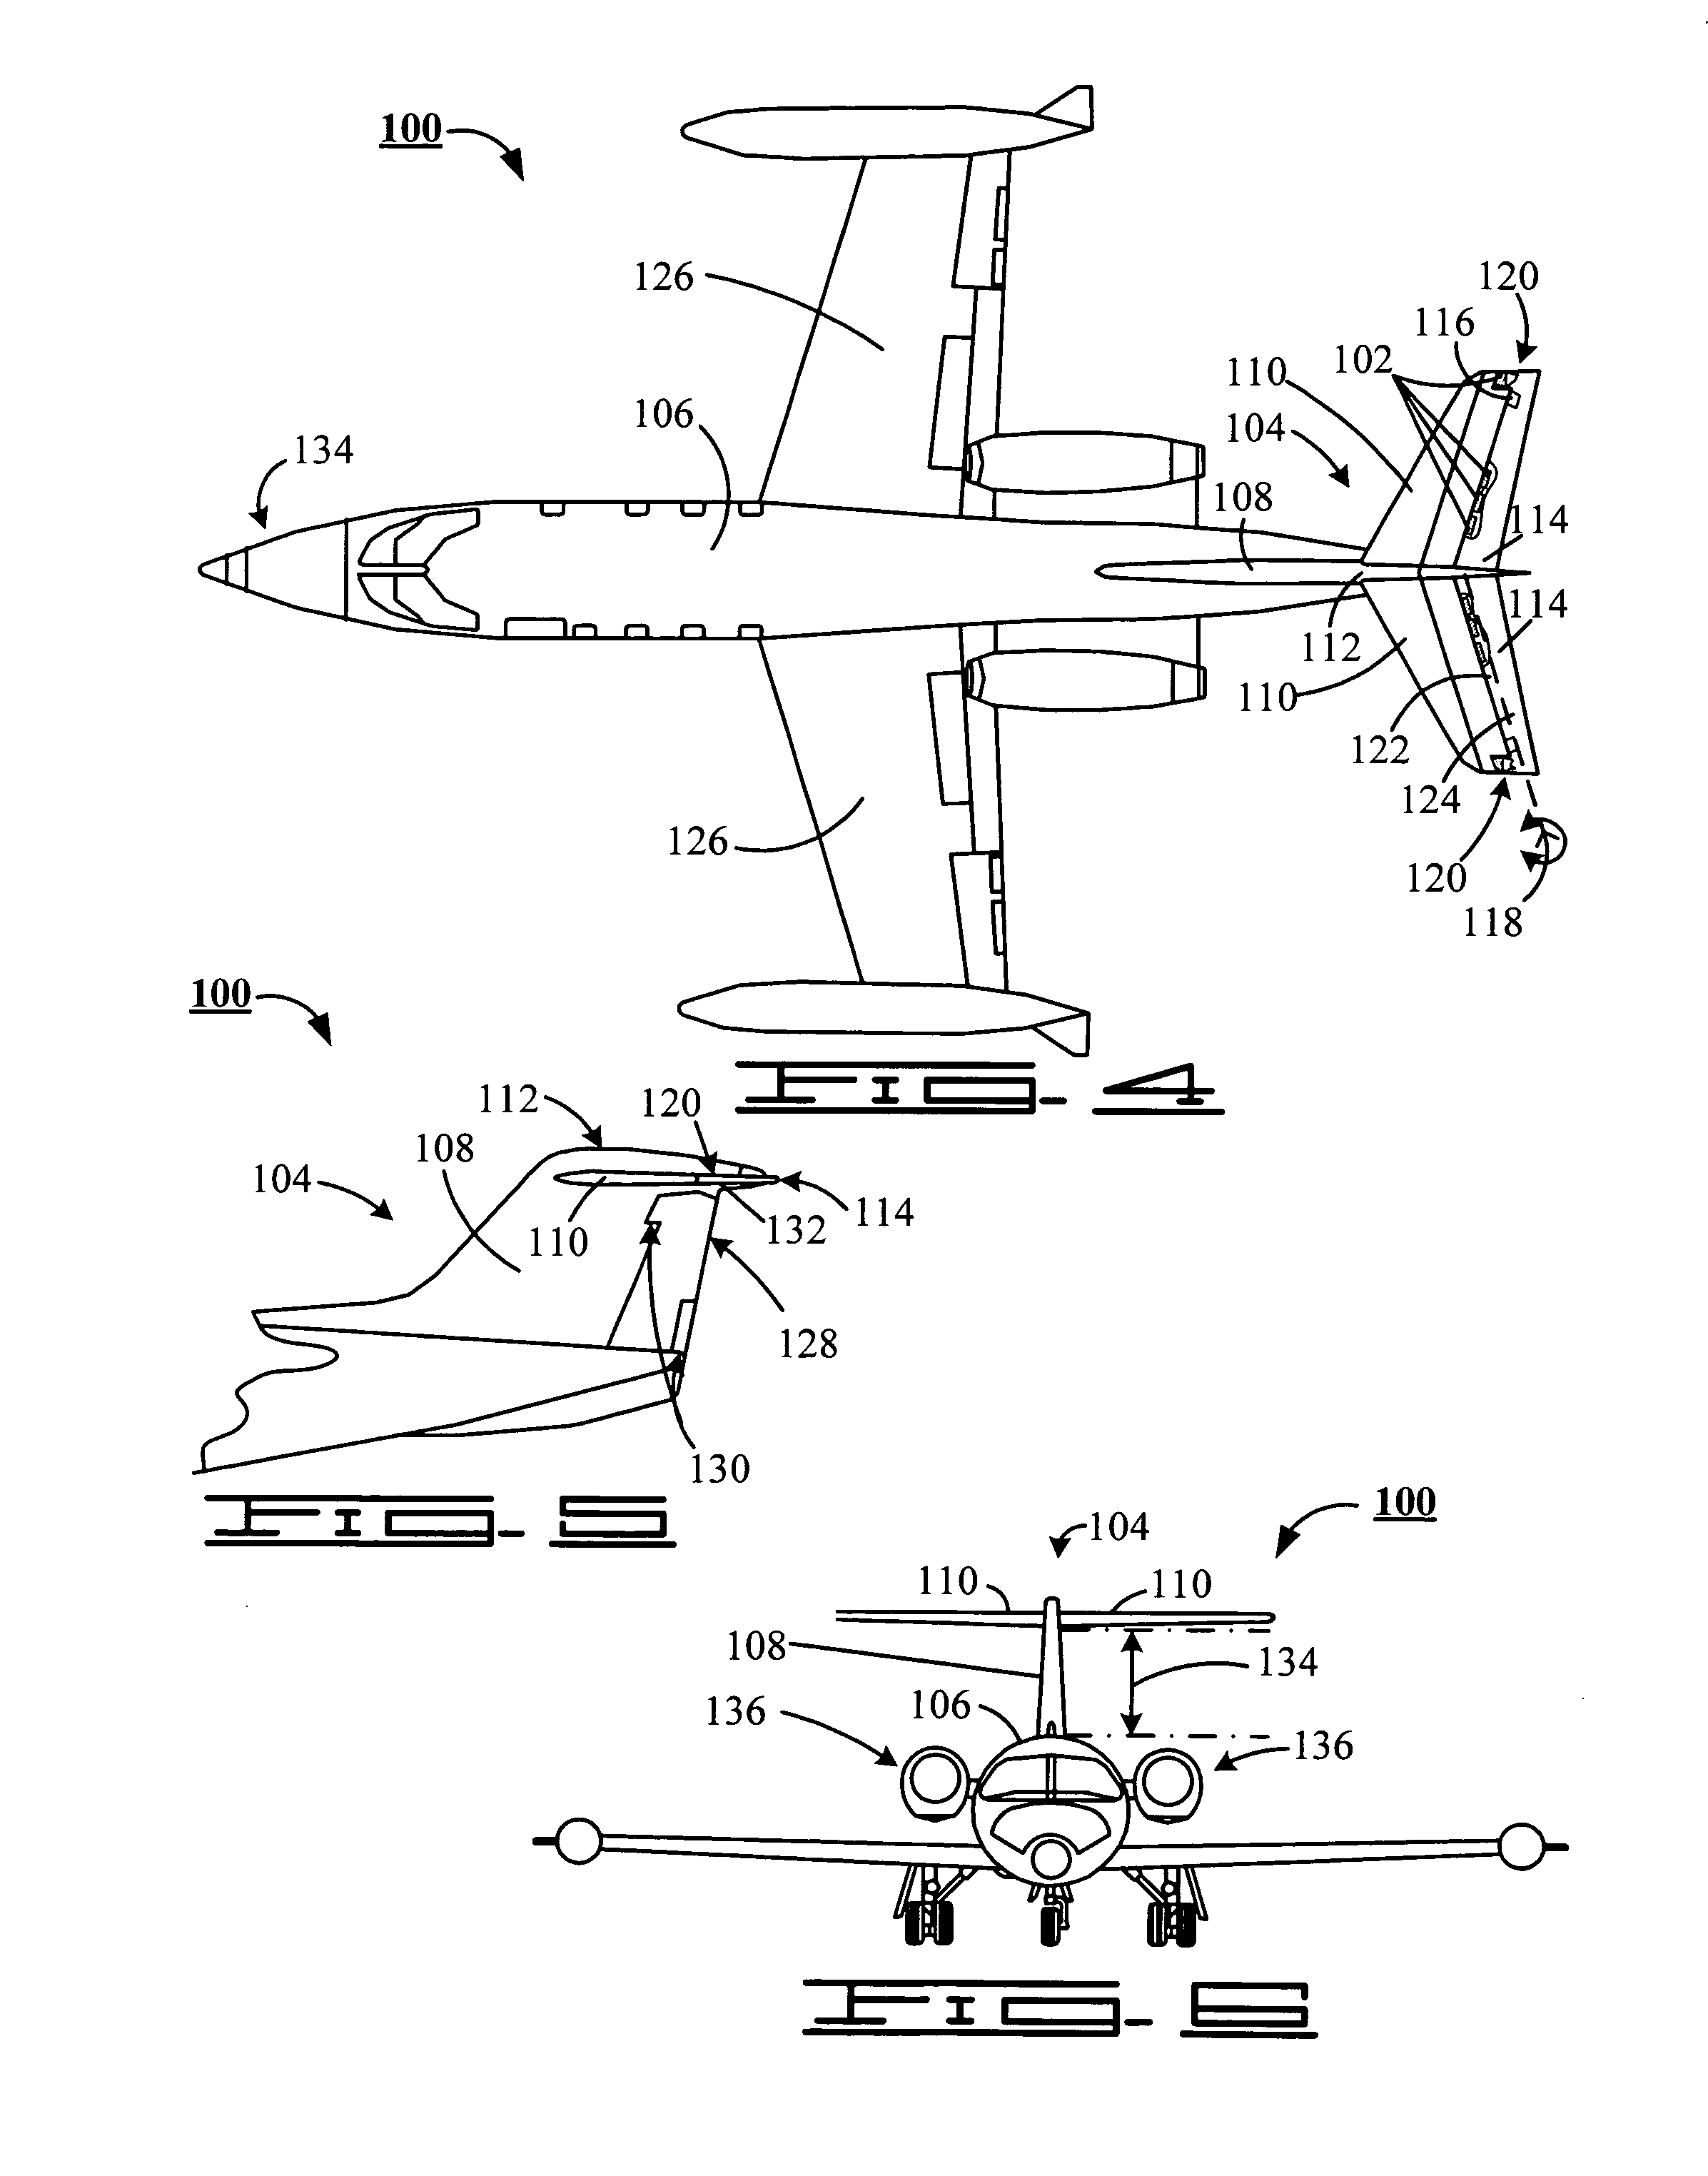 Structural dynamic stability for an aircraft